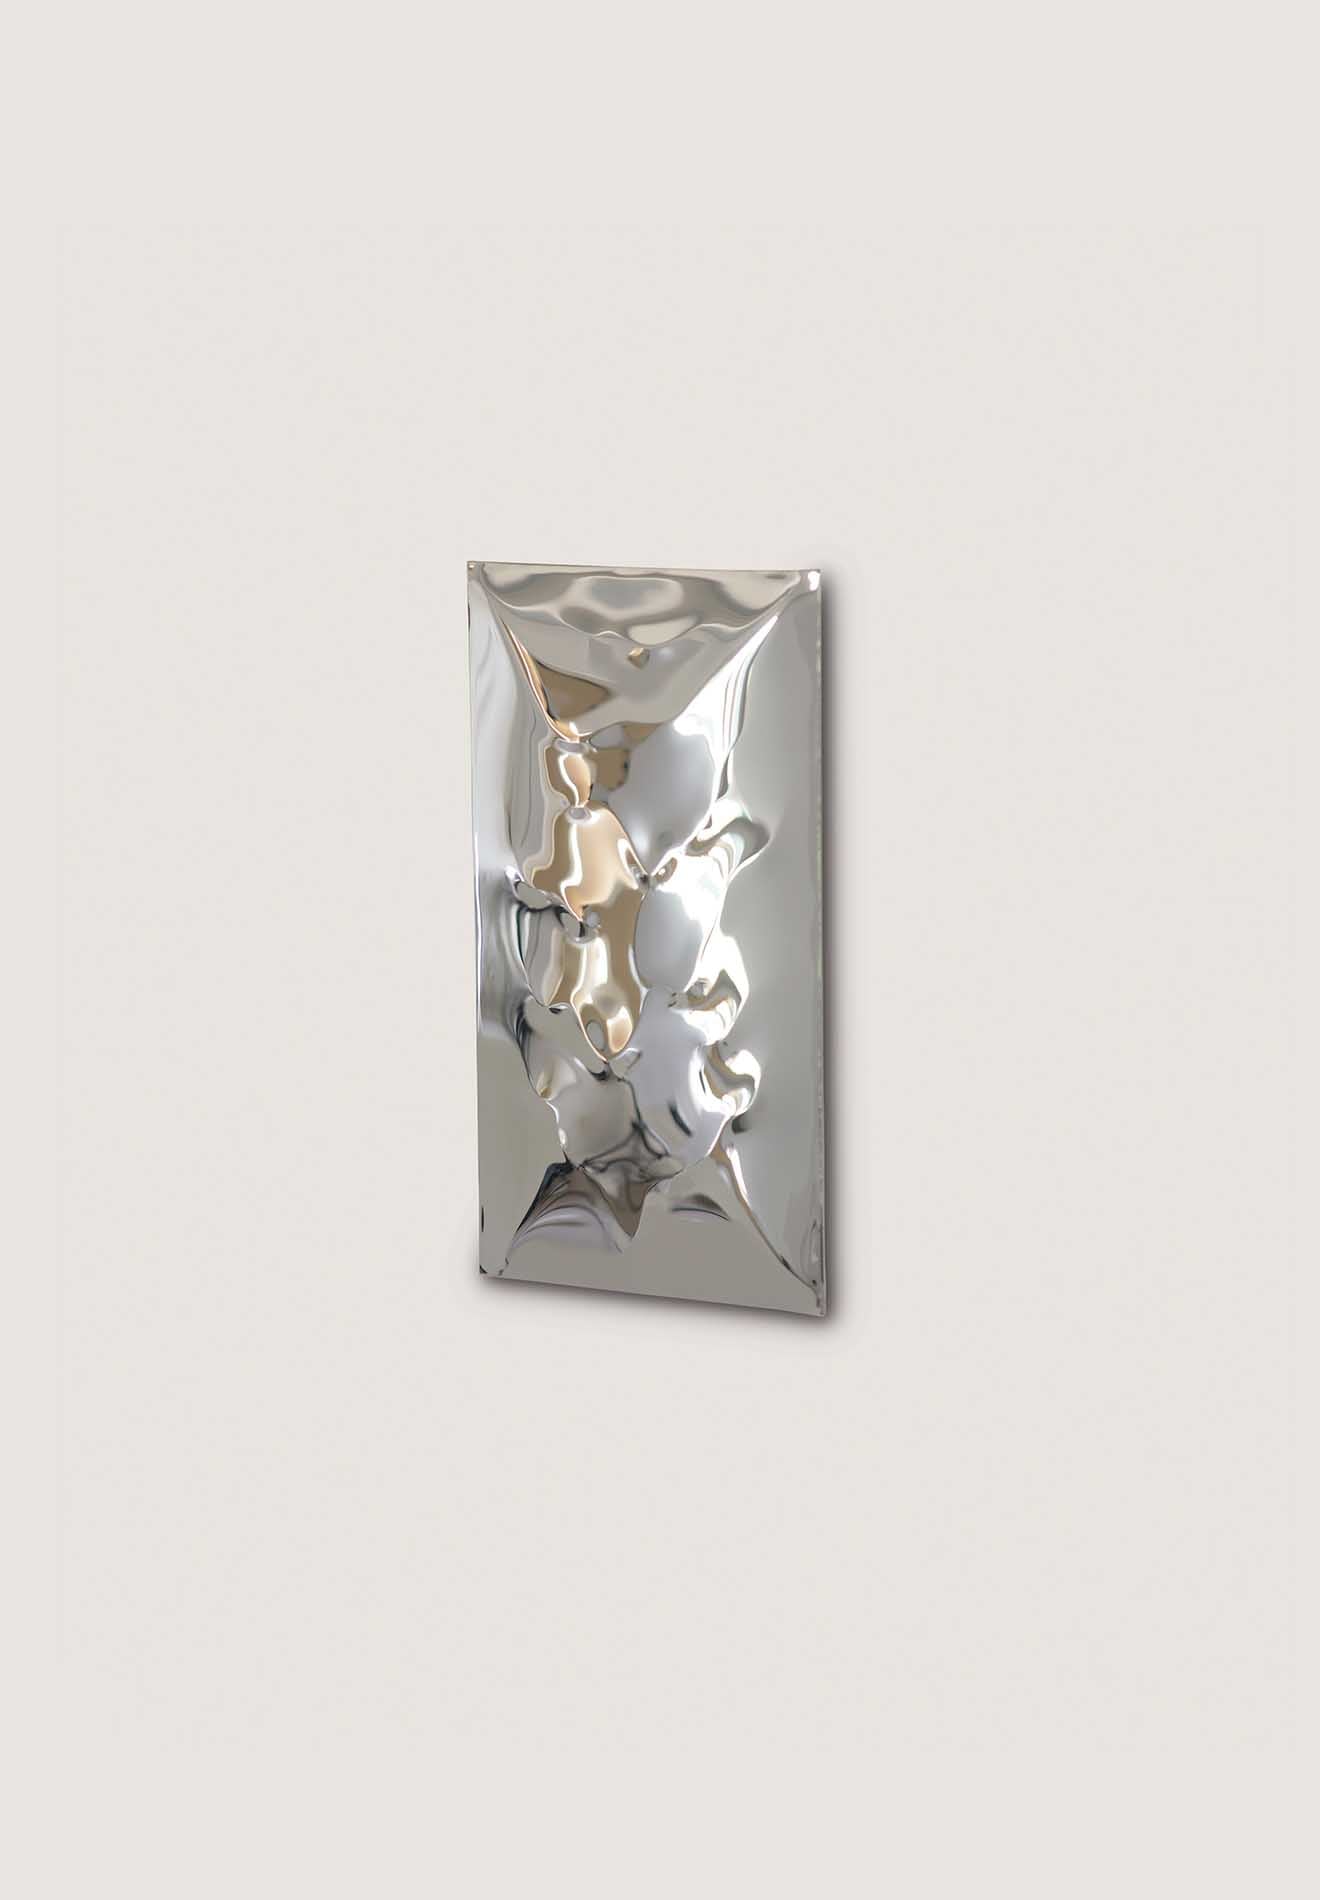 Shown in Polished Steel